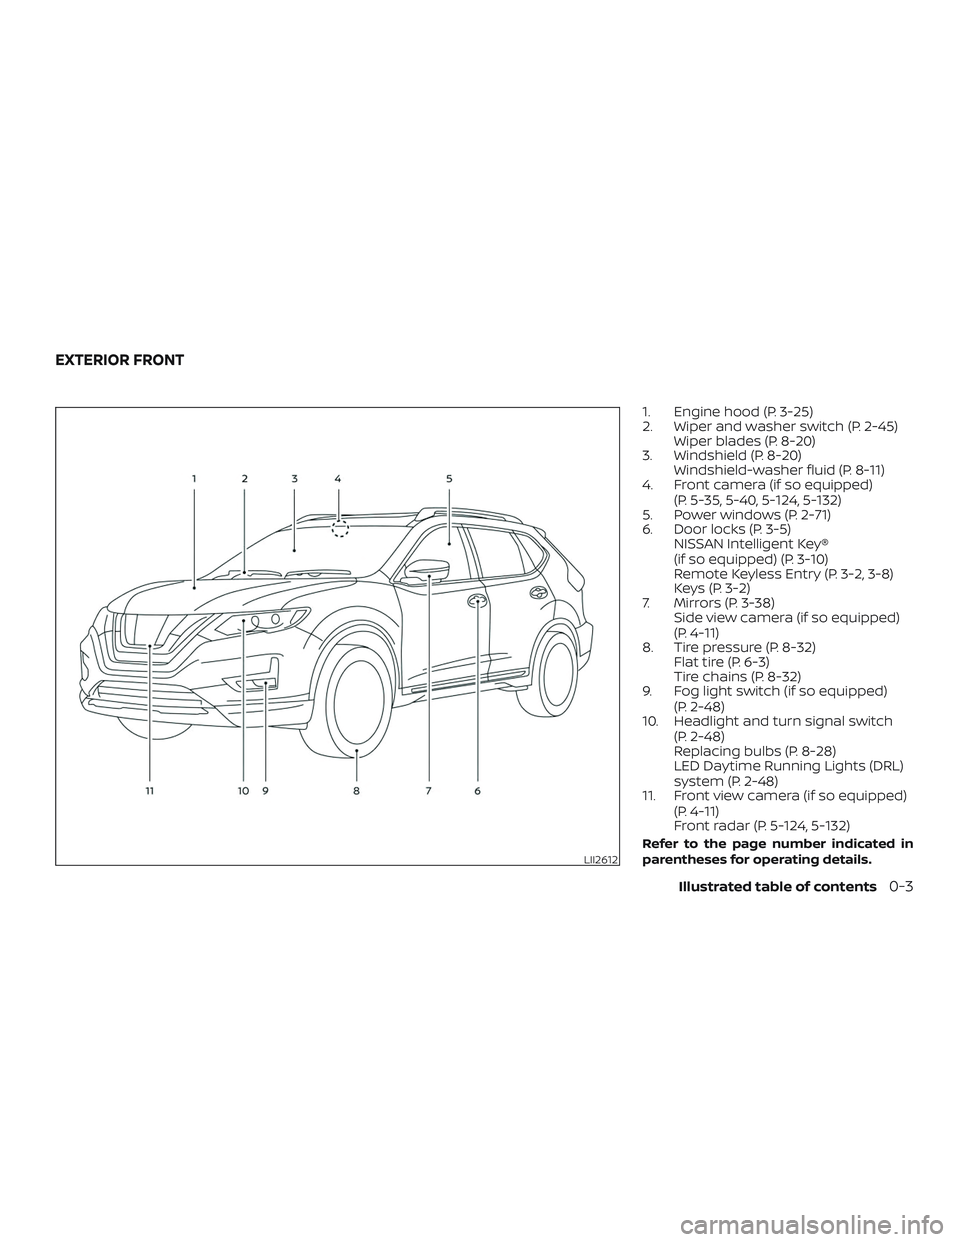 NISSAN ROGUE 2020  Owner´s Manual 1. Engine hood (P. 3-25)
2. Wiper and washer switch (P. 2-45)Wiper blades (P. 8-20)
3. Windshield (P. 8-20) Windshield-washer fluid (P. 8-11)
4. Front camera (if so equipped)
(P. 5-35, 5-40, 5-124, 5-